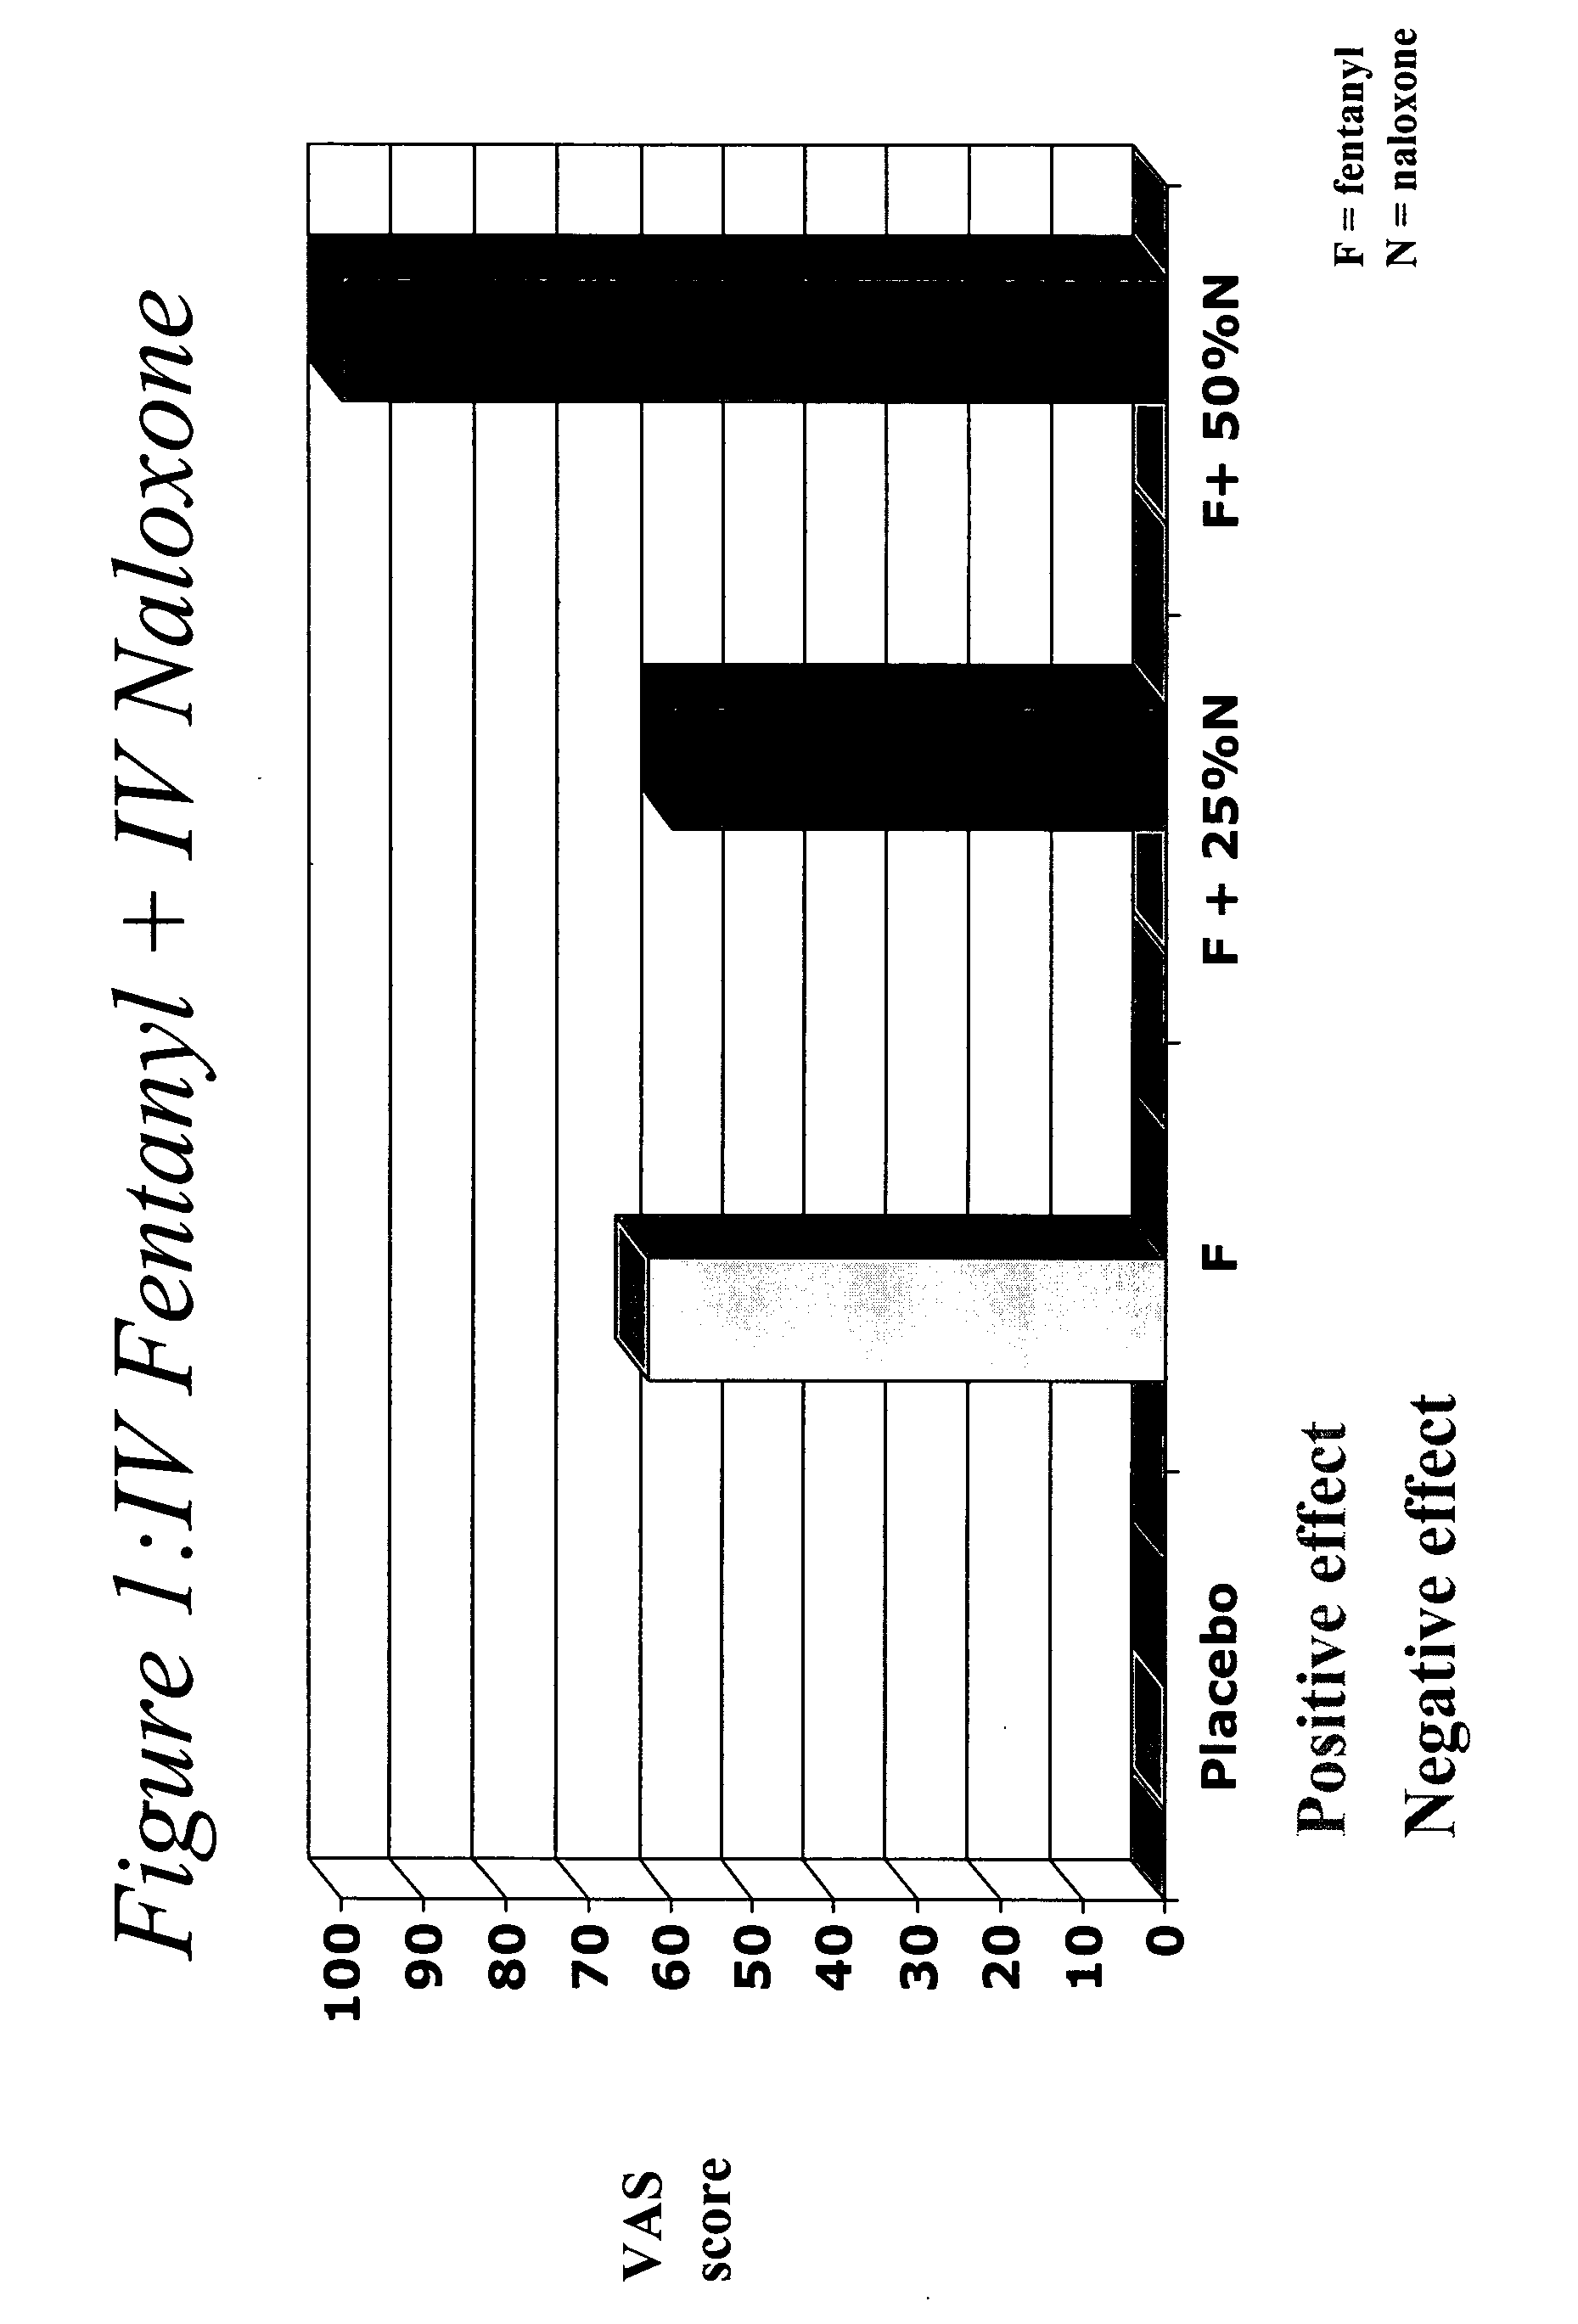 Abuse resistant transmucosal drug delivery device